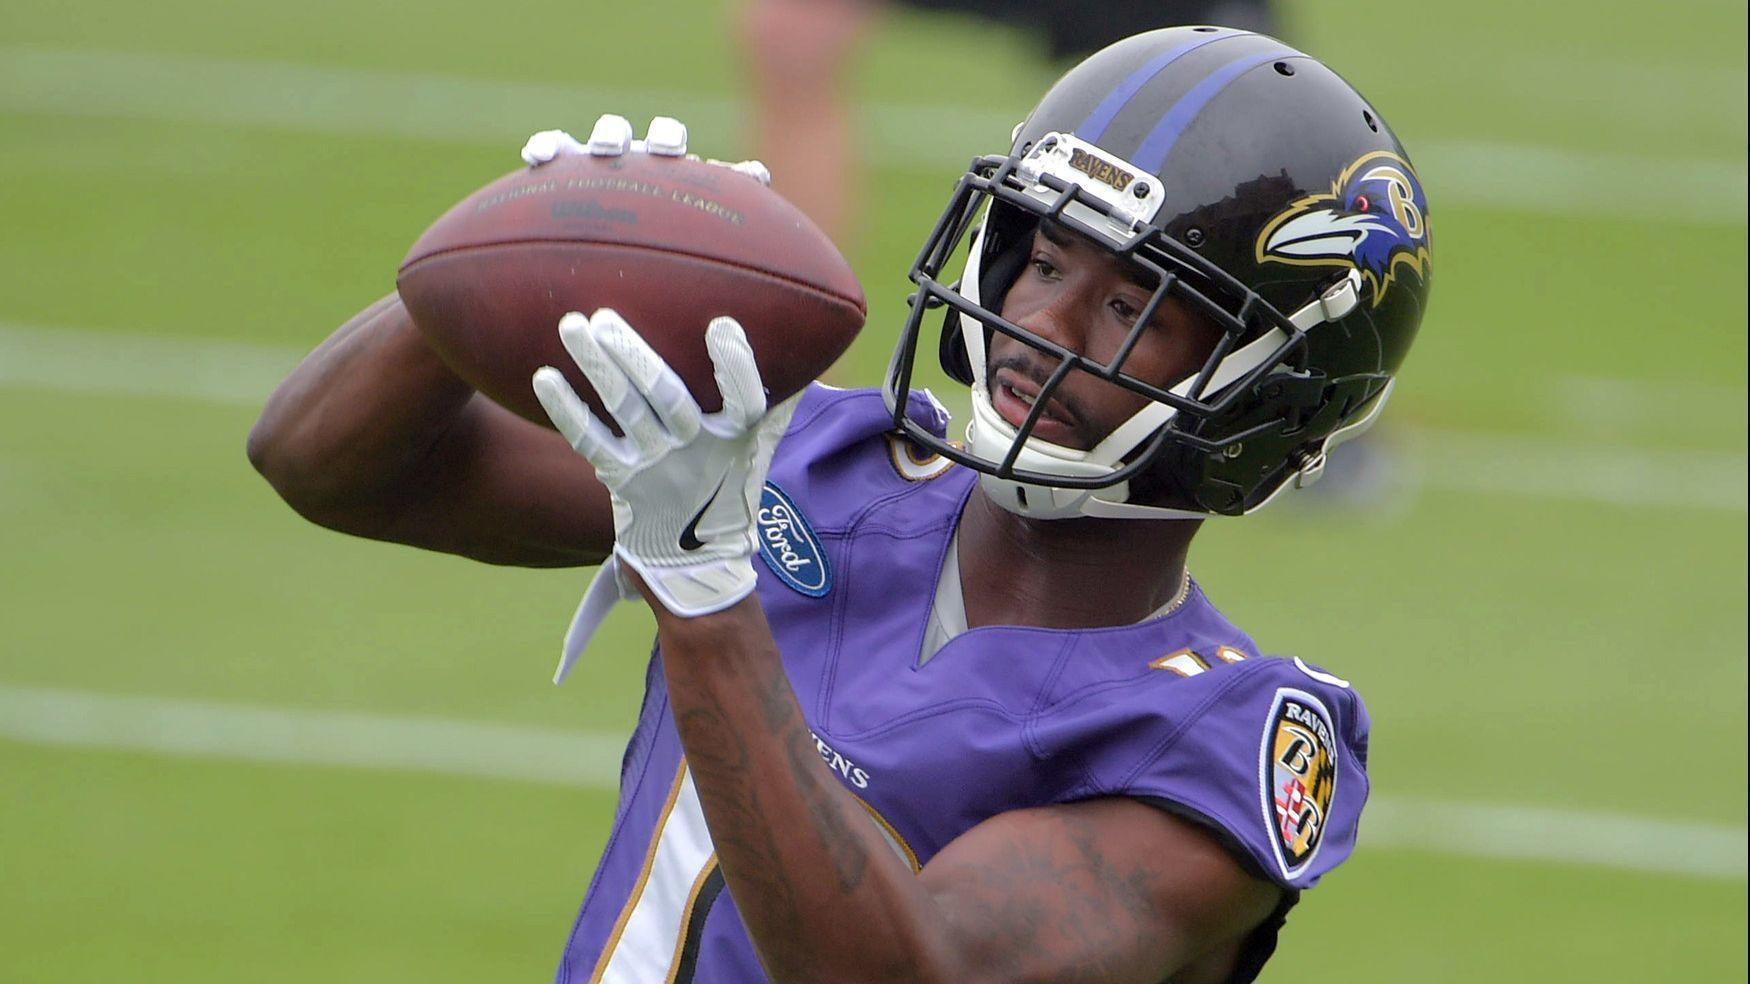 Ravens wide receiver John Brown shows flashes of potential in Thursday’s practice - Baltimore Sun